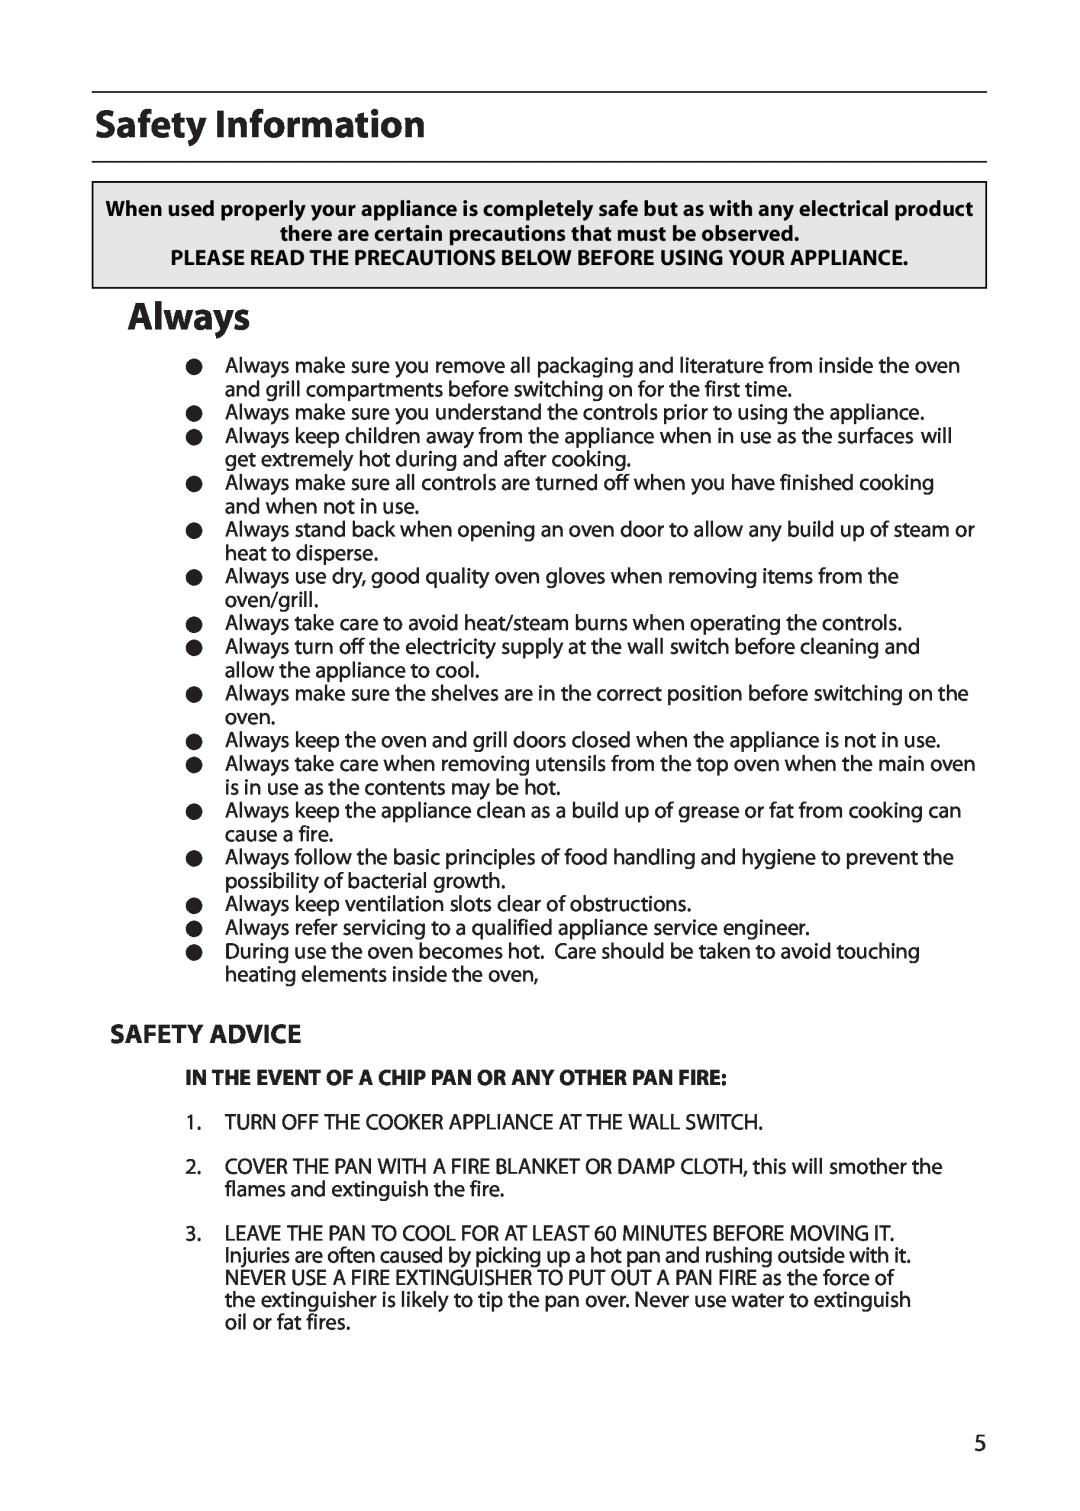 Indesit FDU20 manual Safety Information, Always, Safety Advice, there are certain precautions that must be observed 